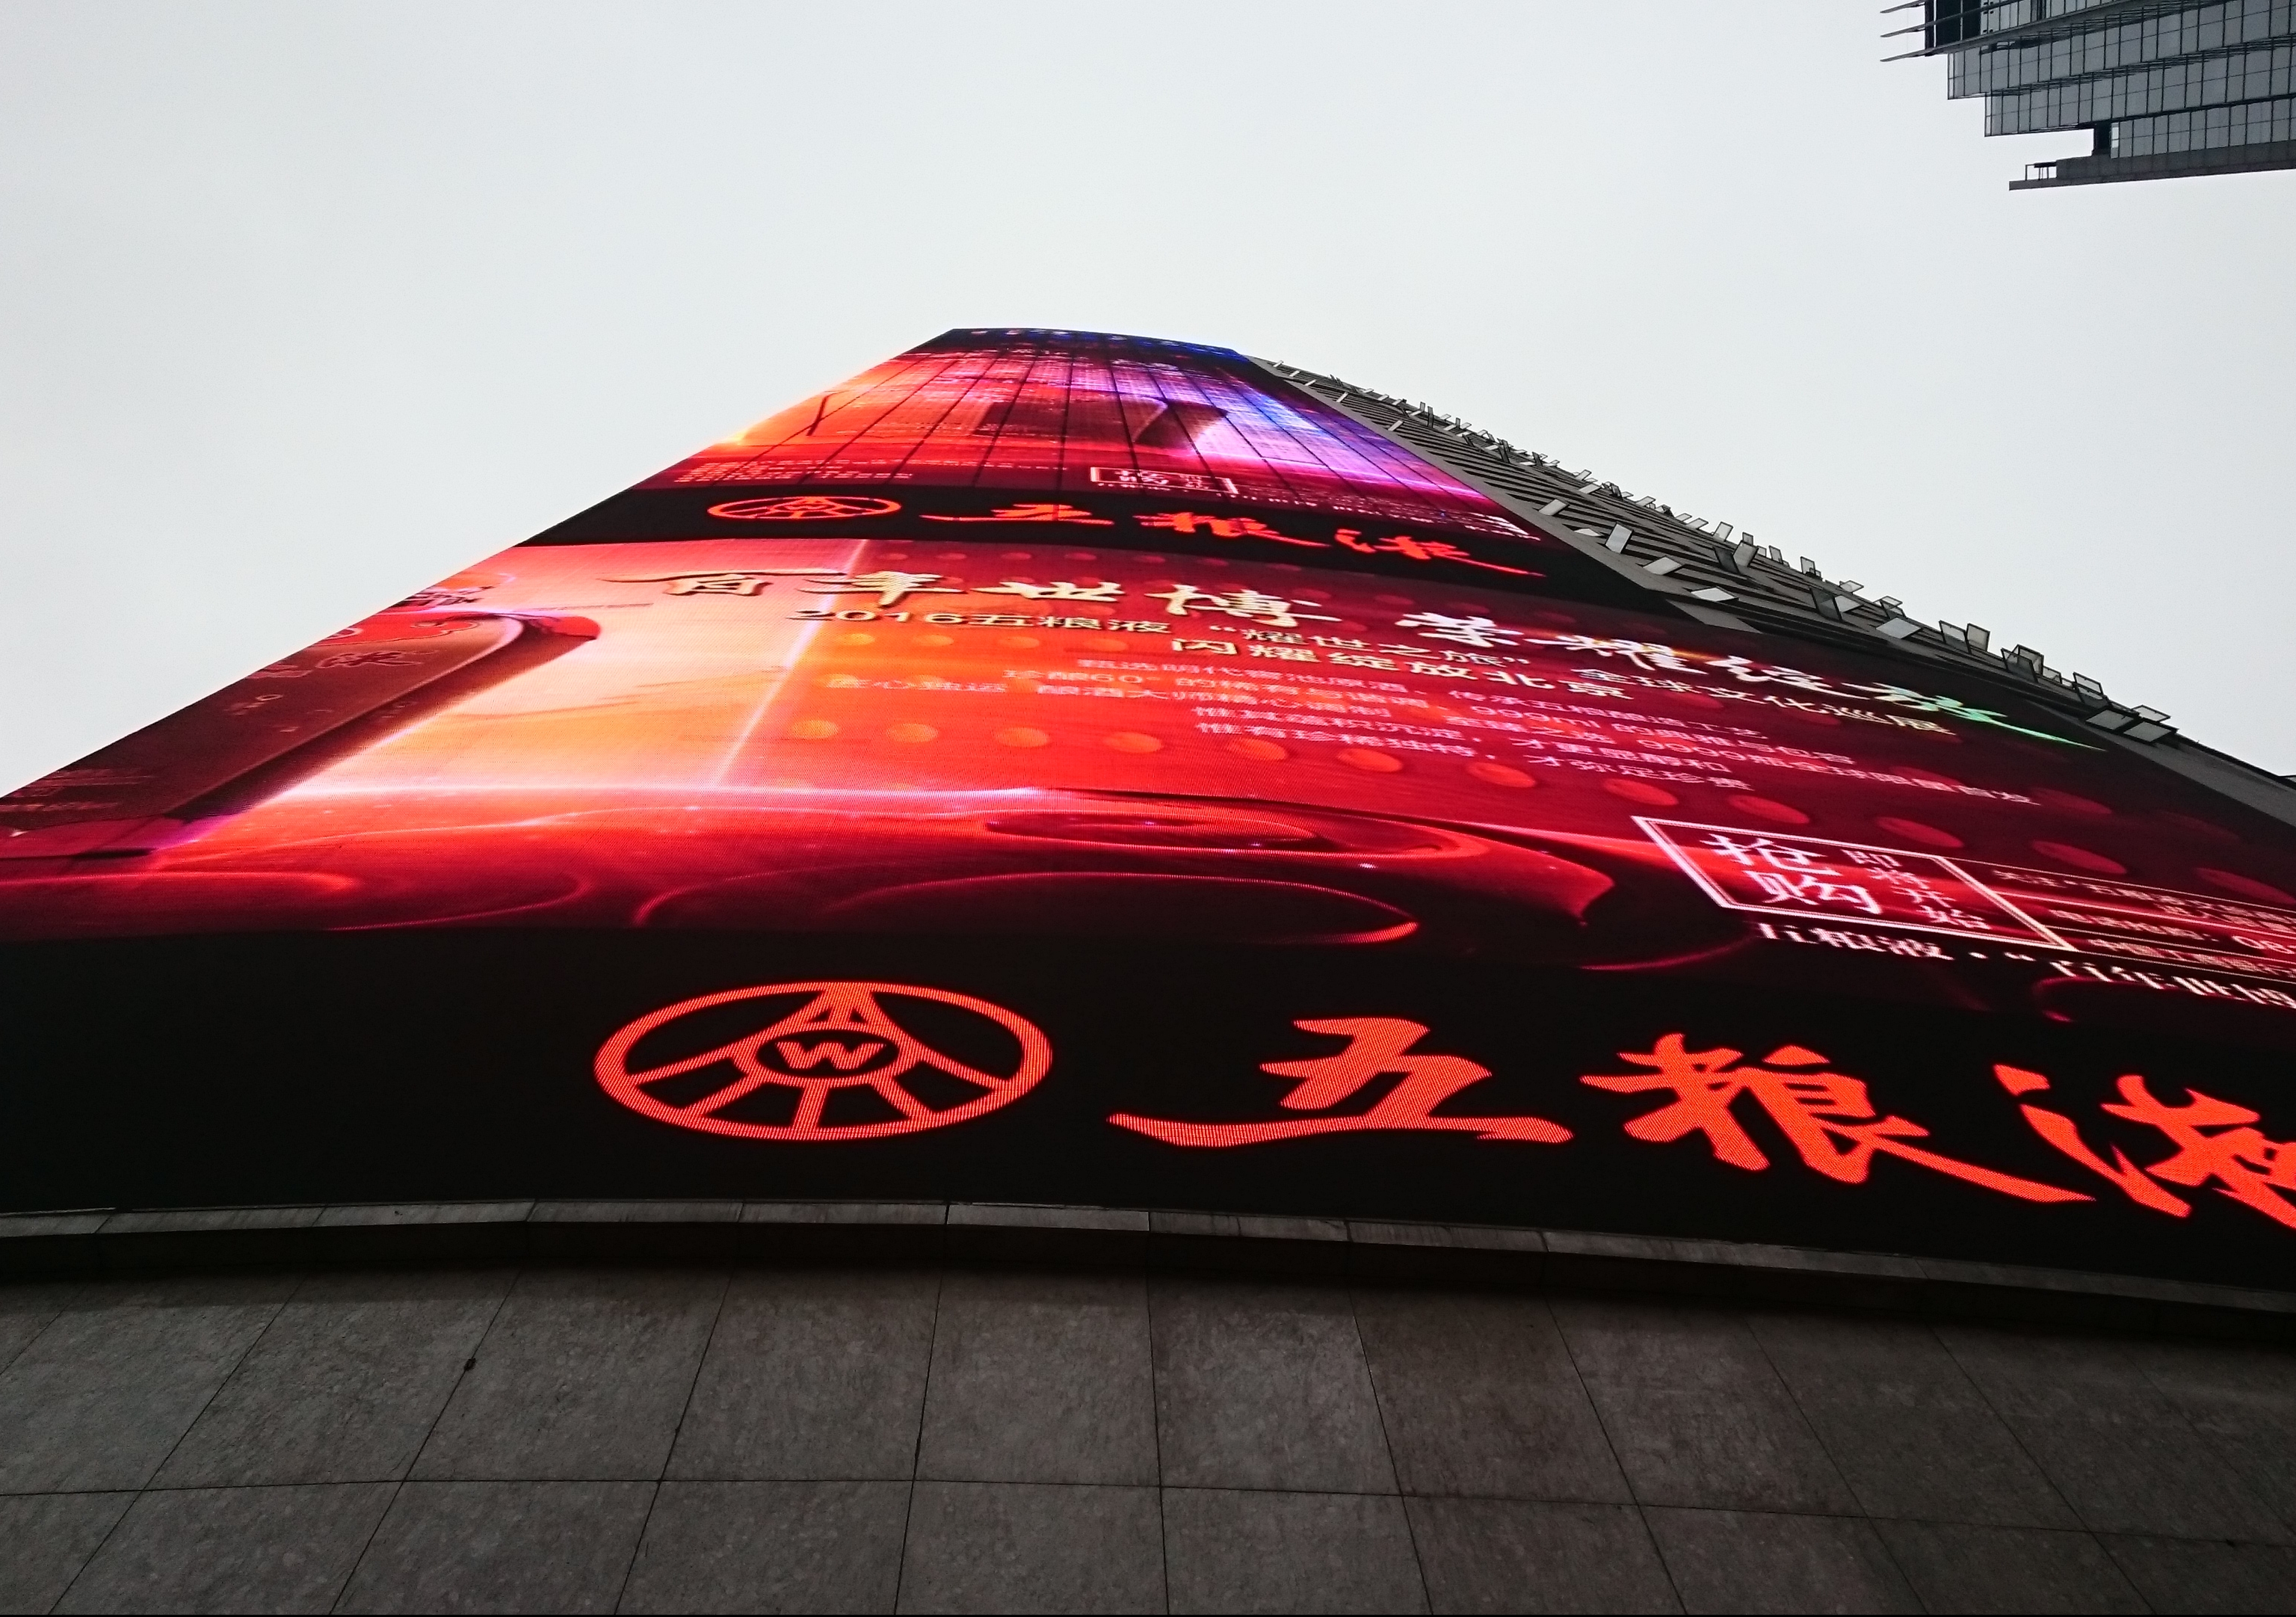 A skyscraper covered in a giant screen used for advertising in China